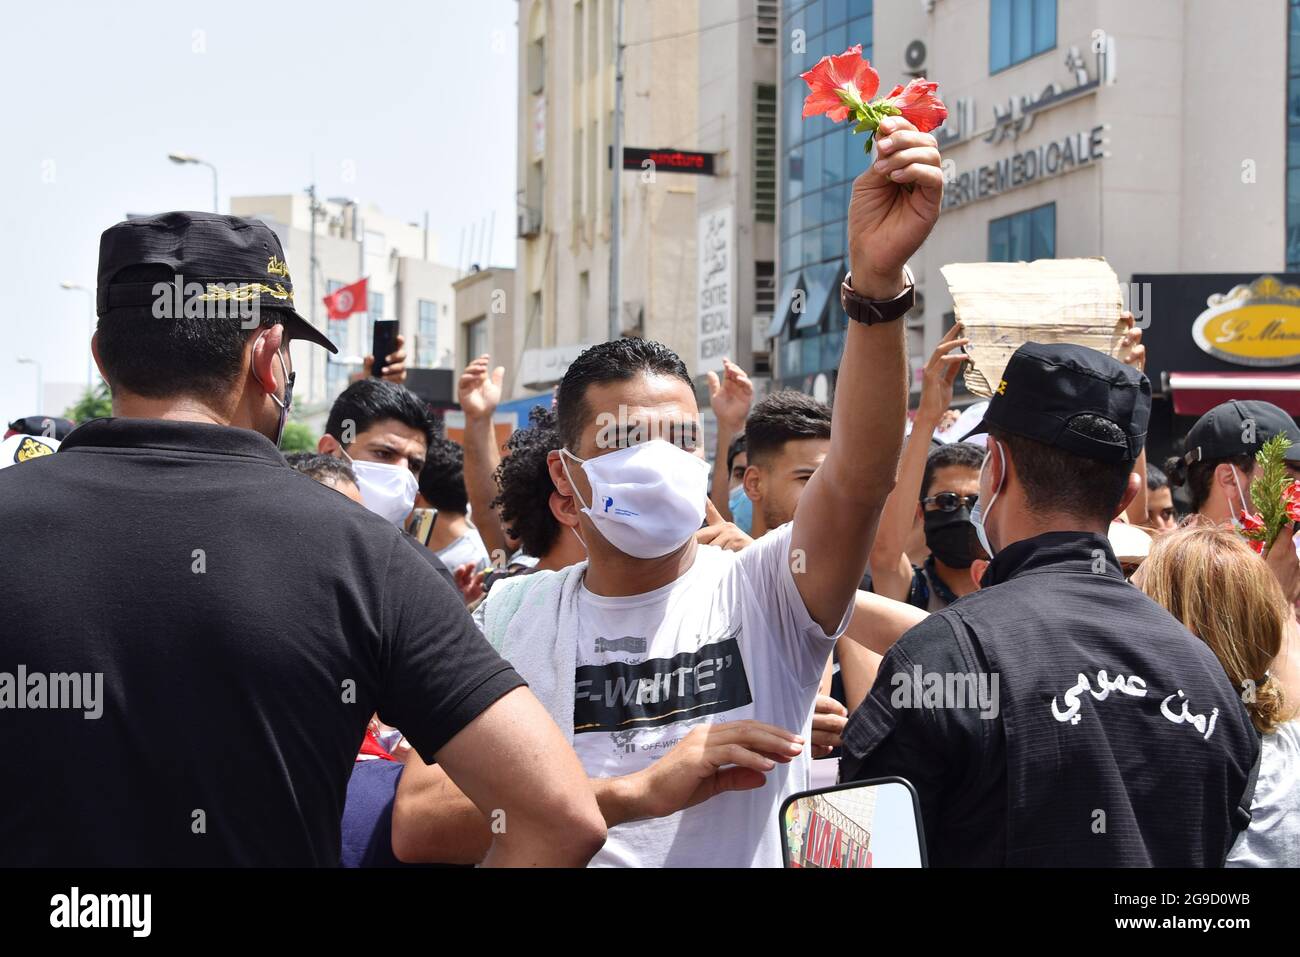 Tunis, Tunisia. 25th July, 2021. A protester holding flowers during a rally against Ennahdha party and the government at the Parliament.Supreme Council for Youth called for protests on Republic Day demanding a change in the political system during a transitional period of 6 months while retaining the President of the Republic, Qais Saied. (Photo by Jdidi Wassim/SOPA Images/Sipa USA) Credit: Sipa USA/Alamy Live News Stock Photo